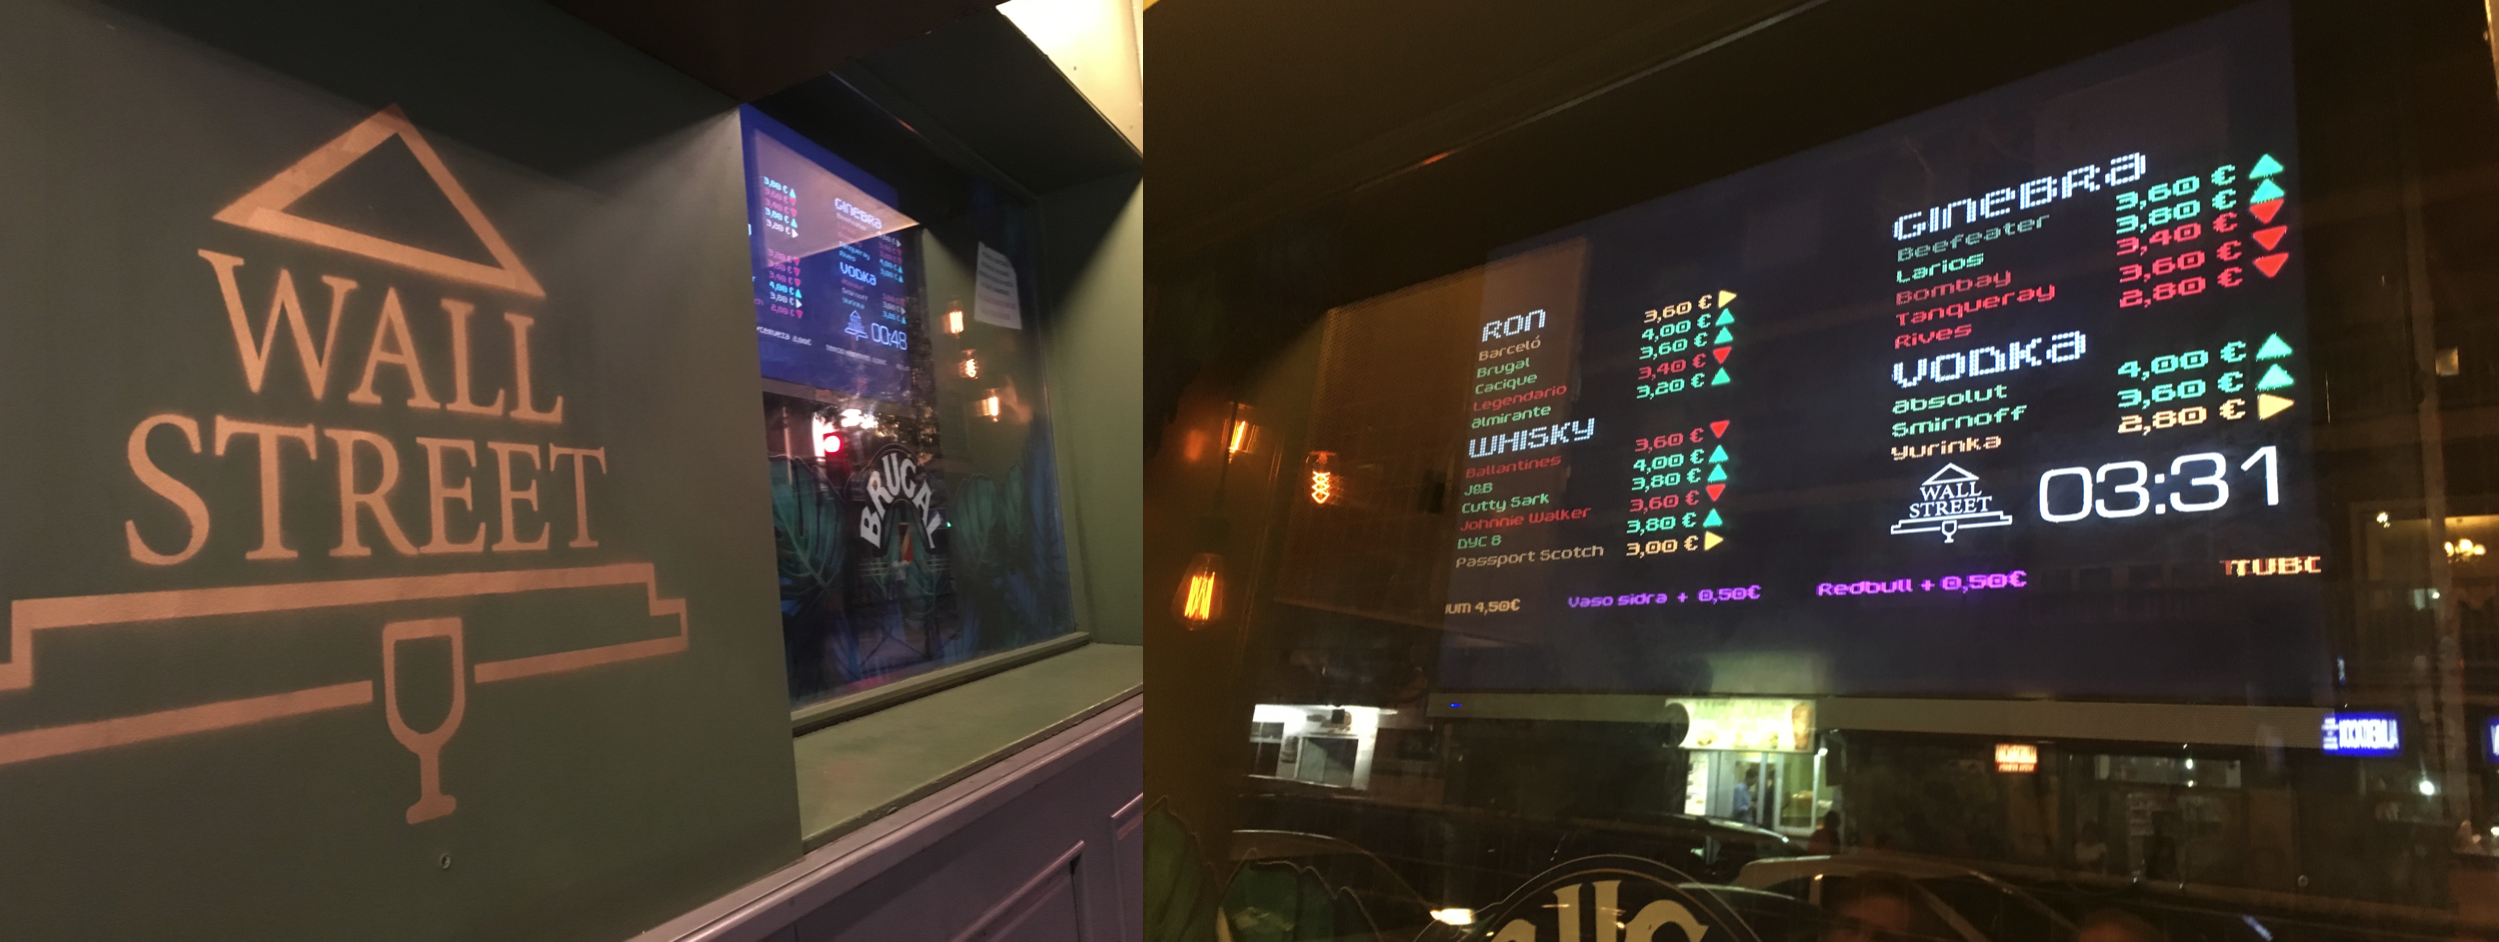 The digital signs in the wallstreet bar